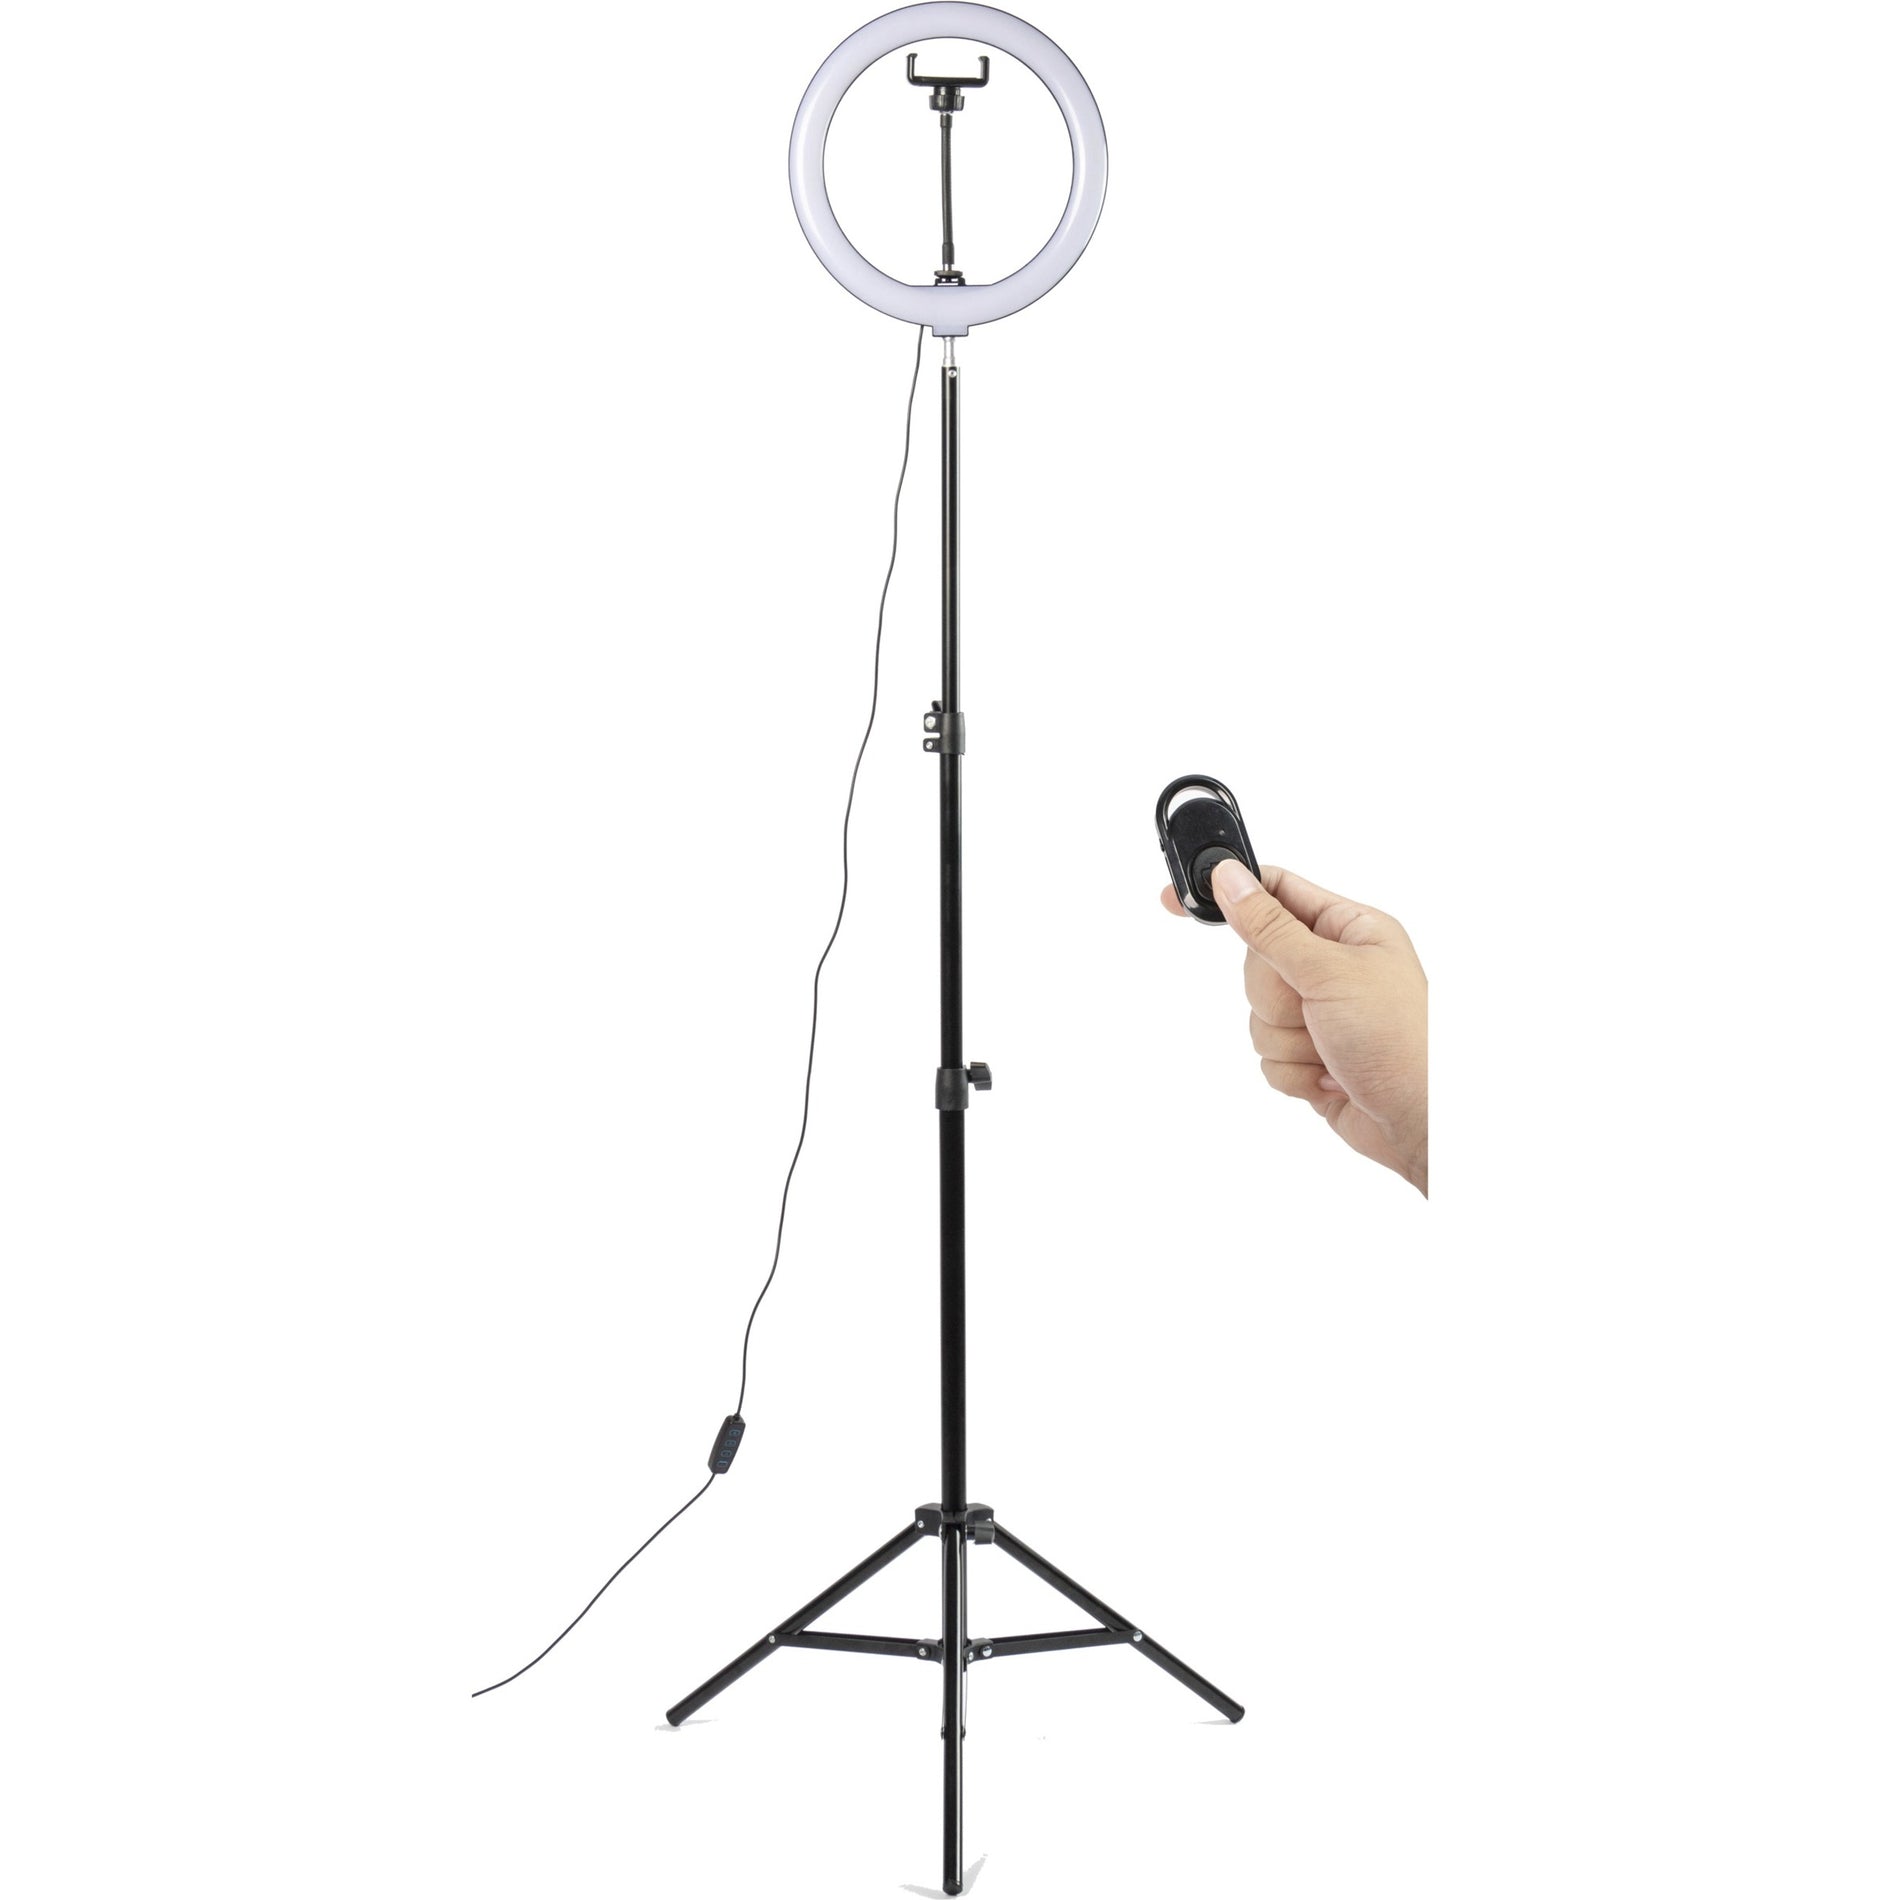 Blackmore BLR-10LED 10 inch LED Ring Light with Phone Holder and Tripod, Perfect for Selfies and Video Recording